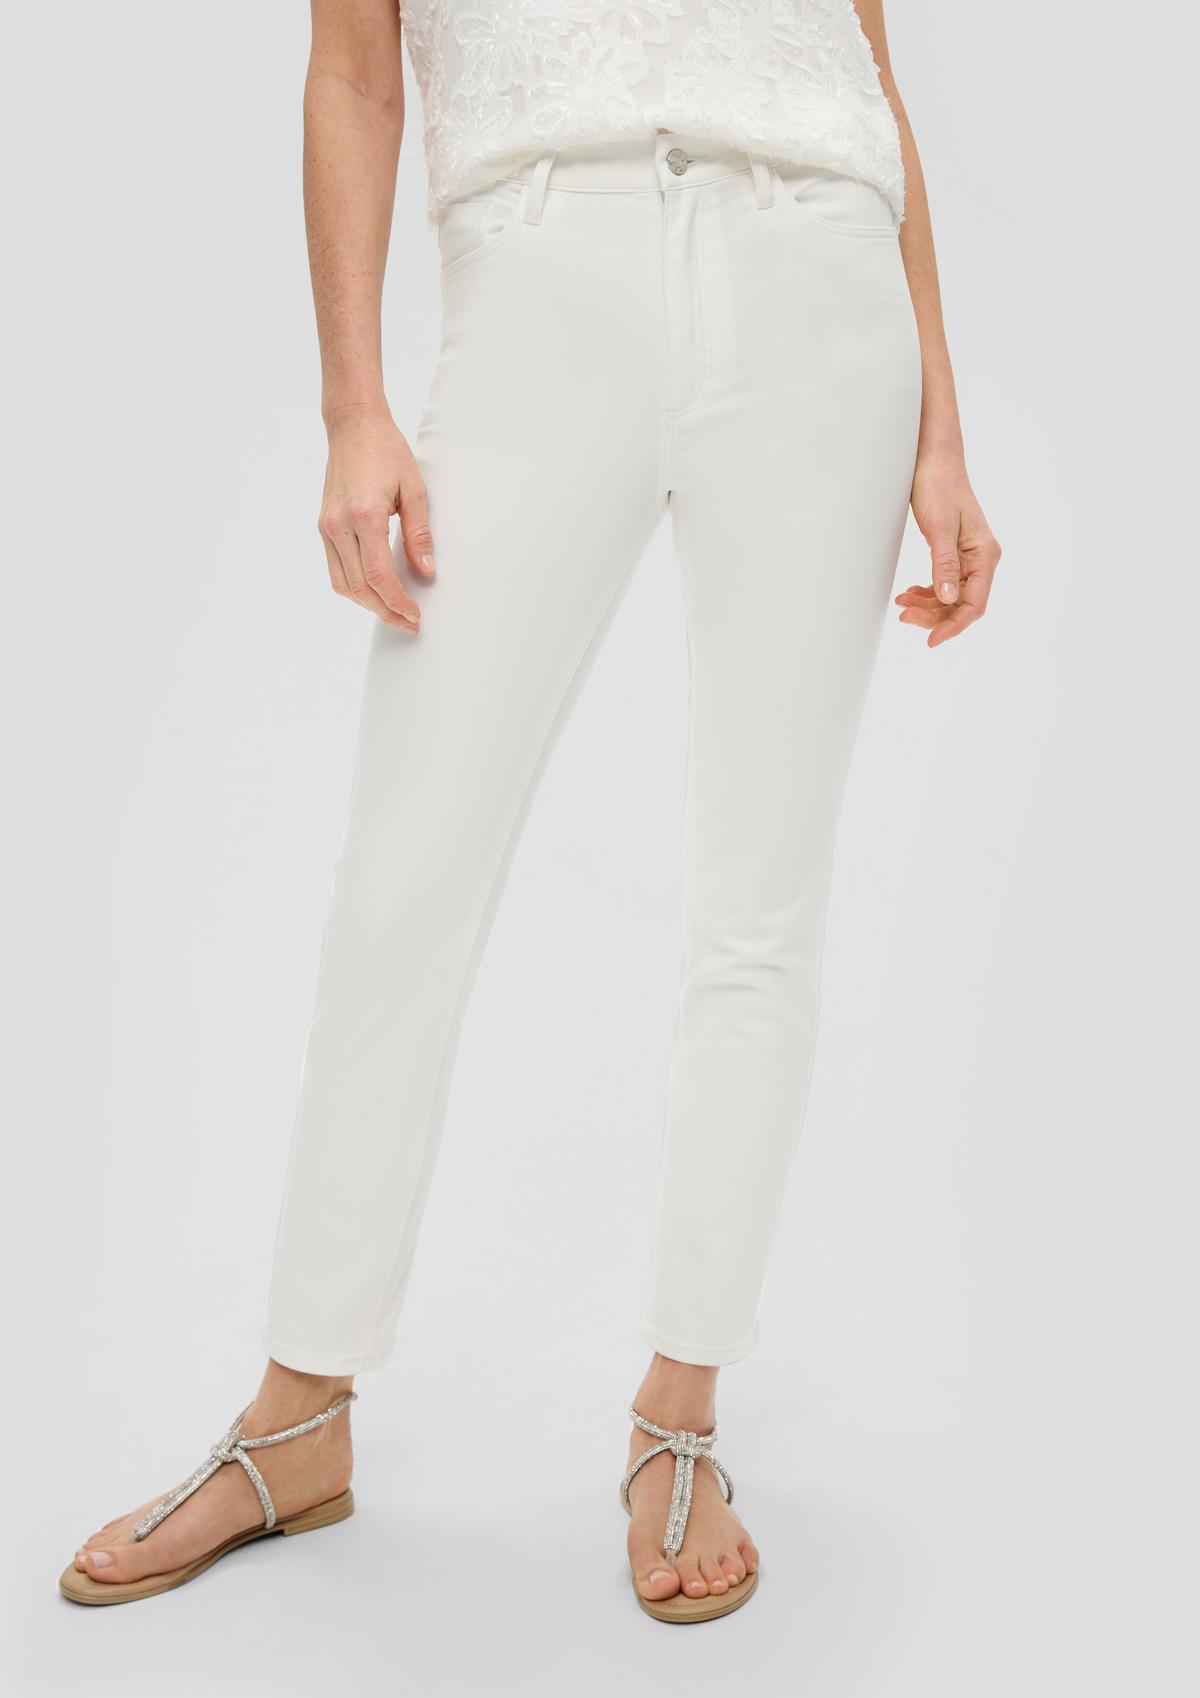 s.Oliver Cropped jeans Betsy / slim fit / high rise / slim leg